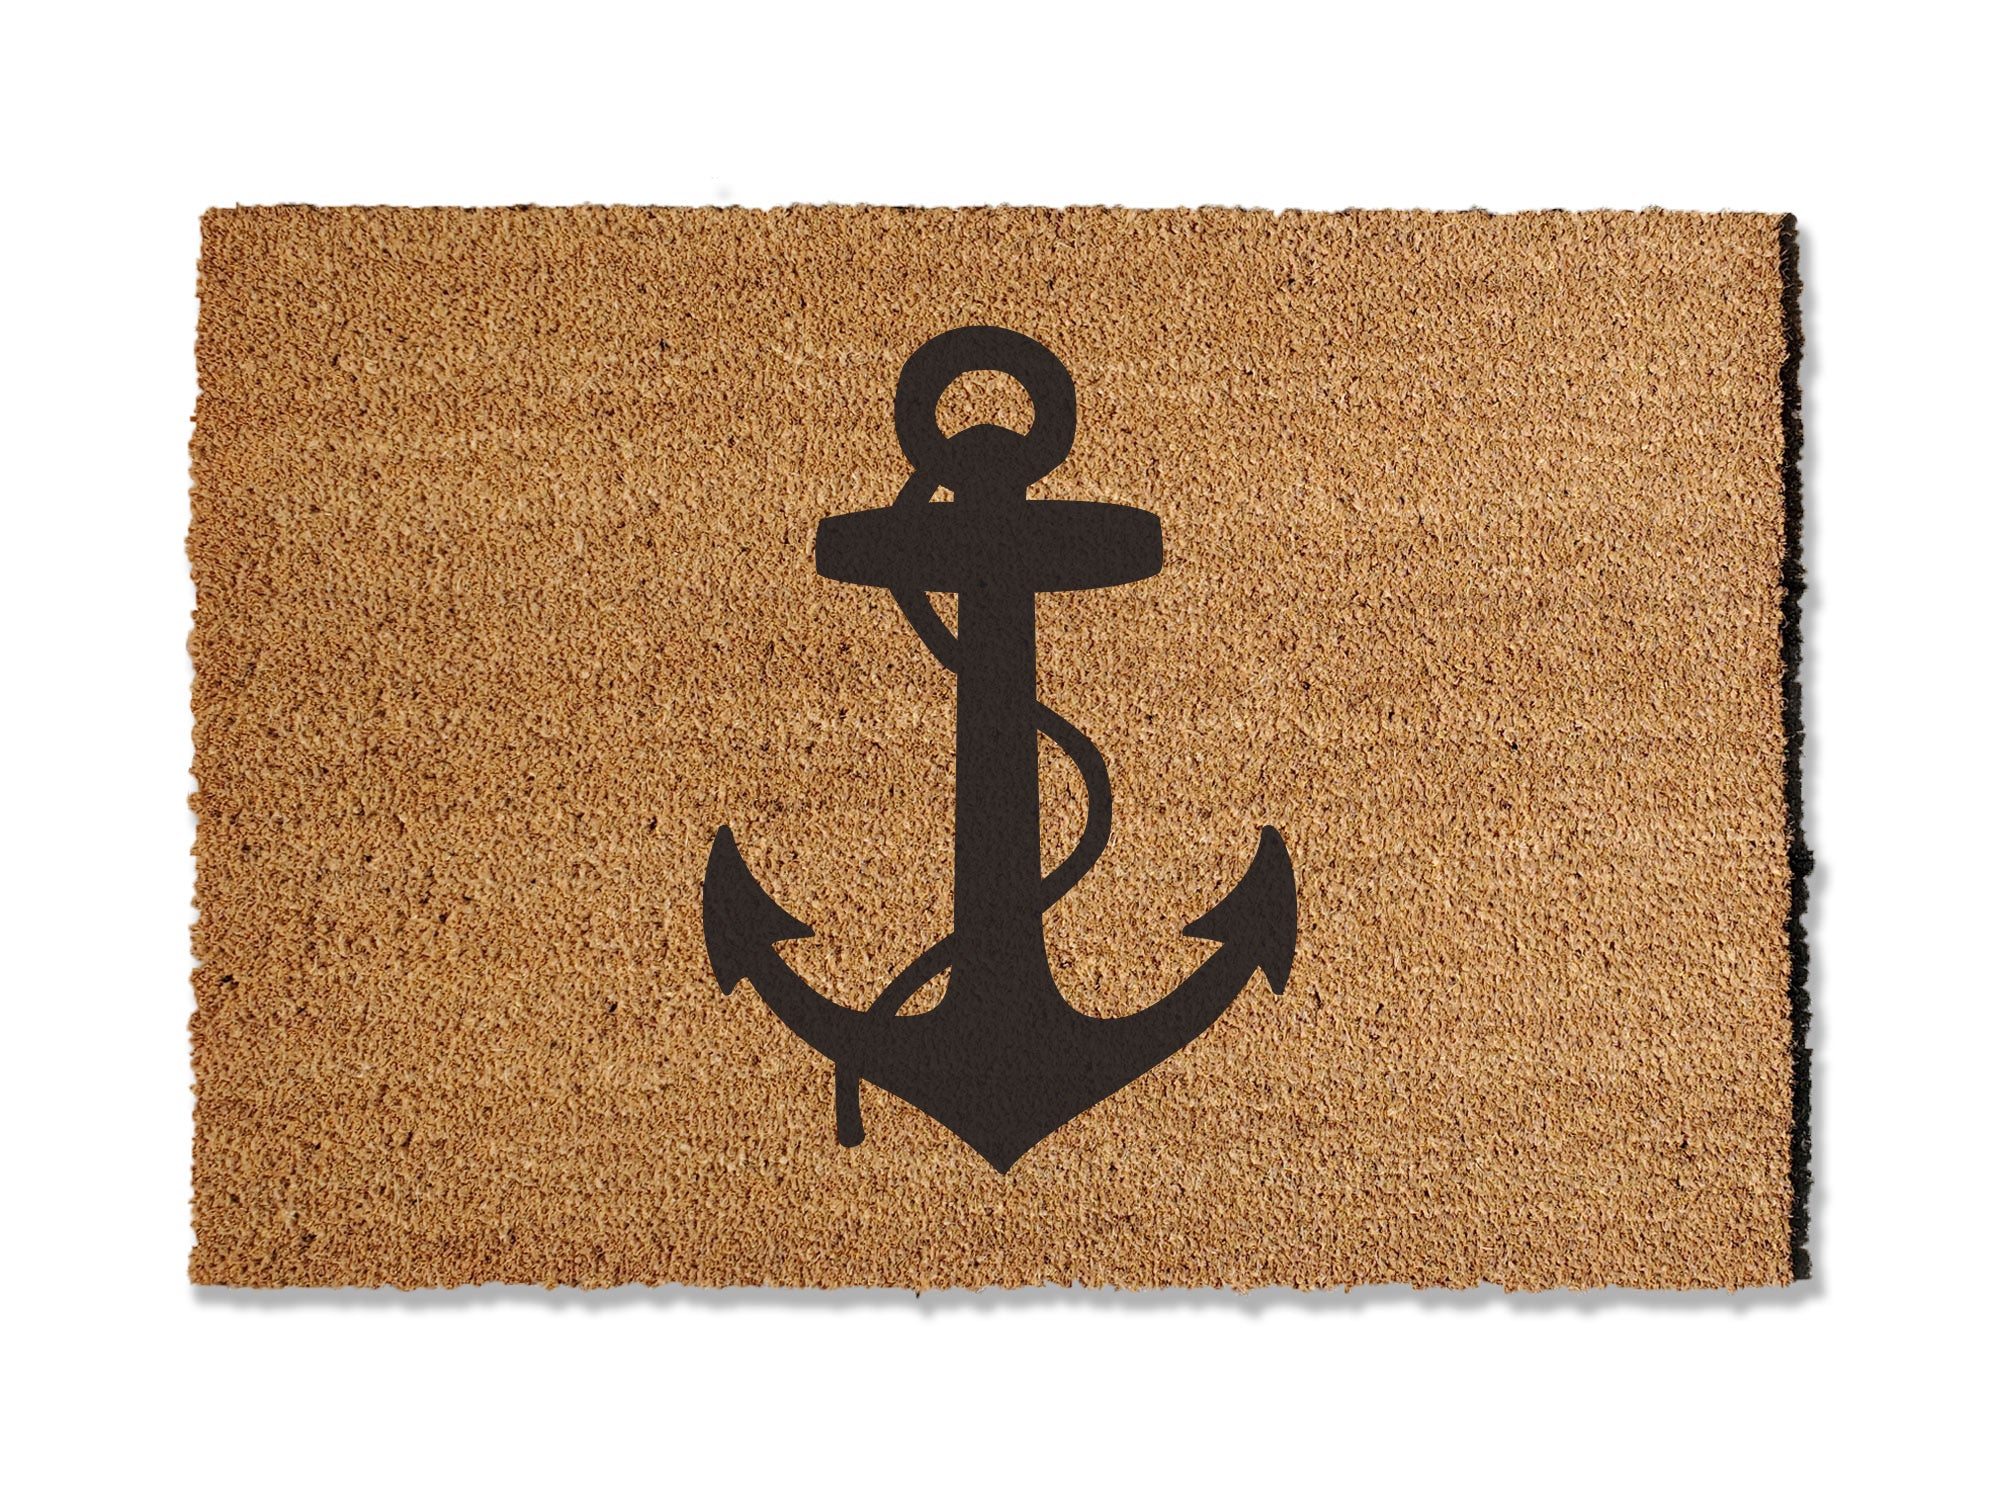 A coir doormat that is 24 inches by 36 inches and has a black anchor printed on it.